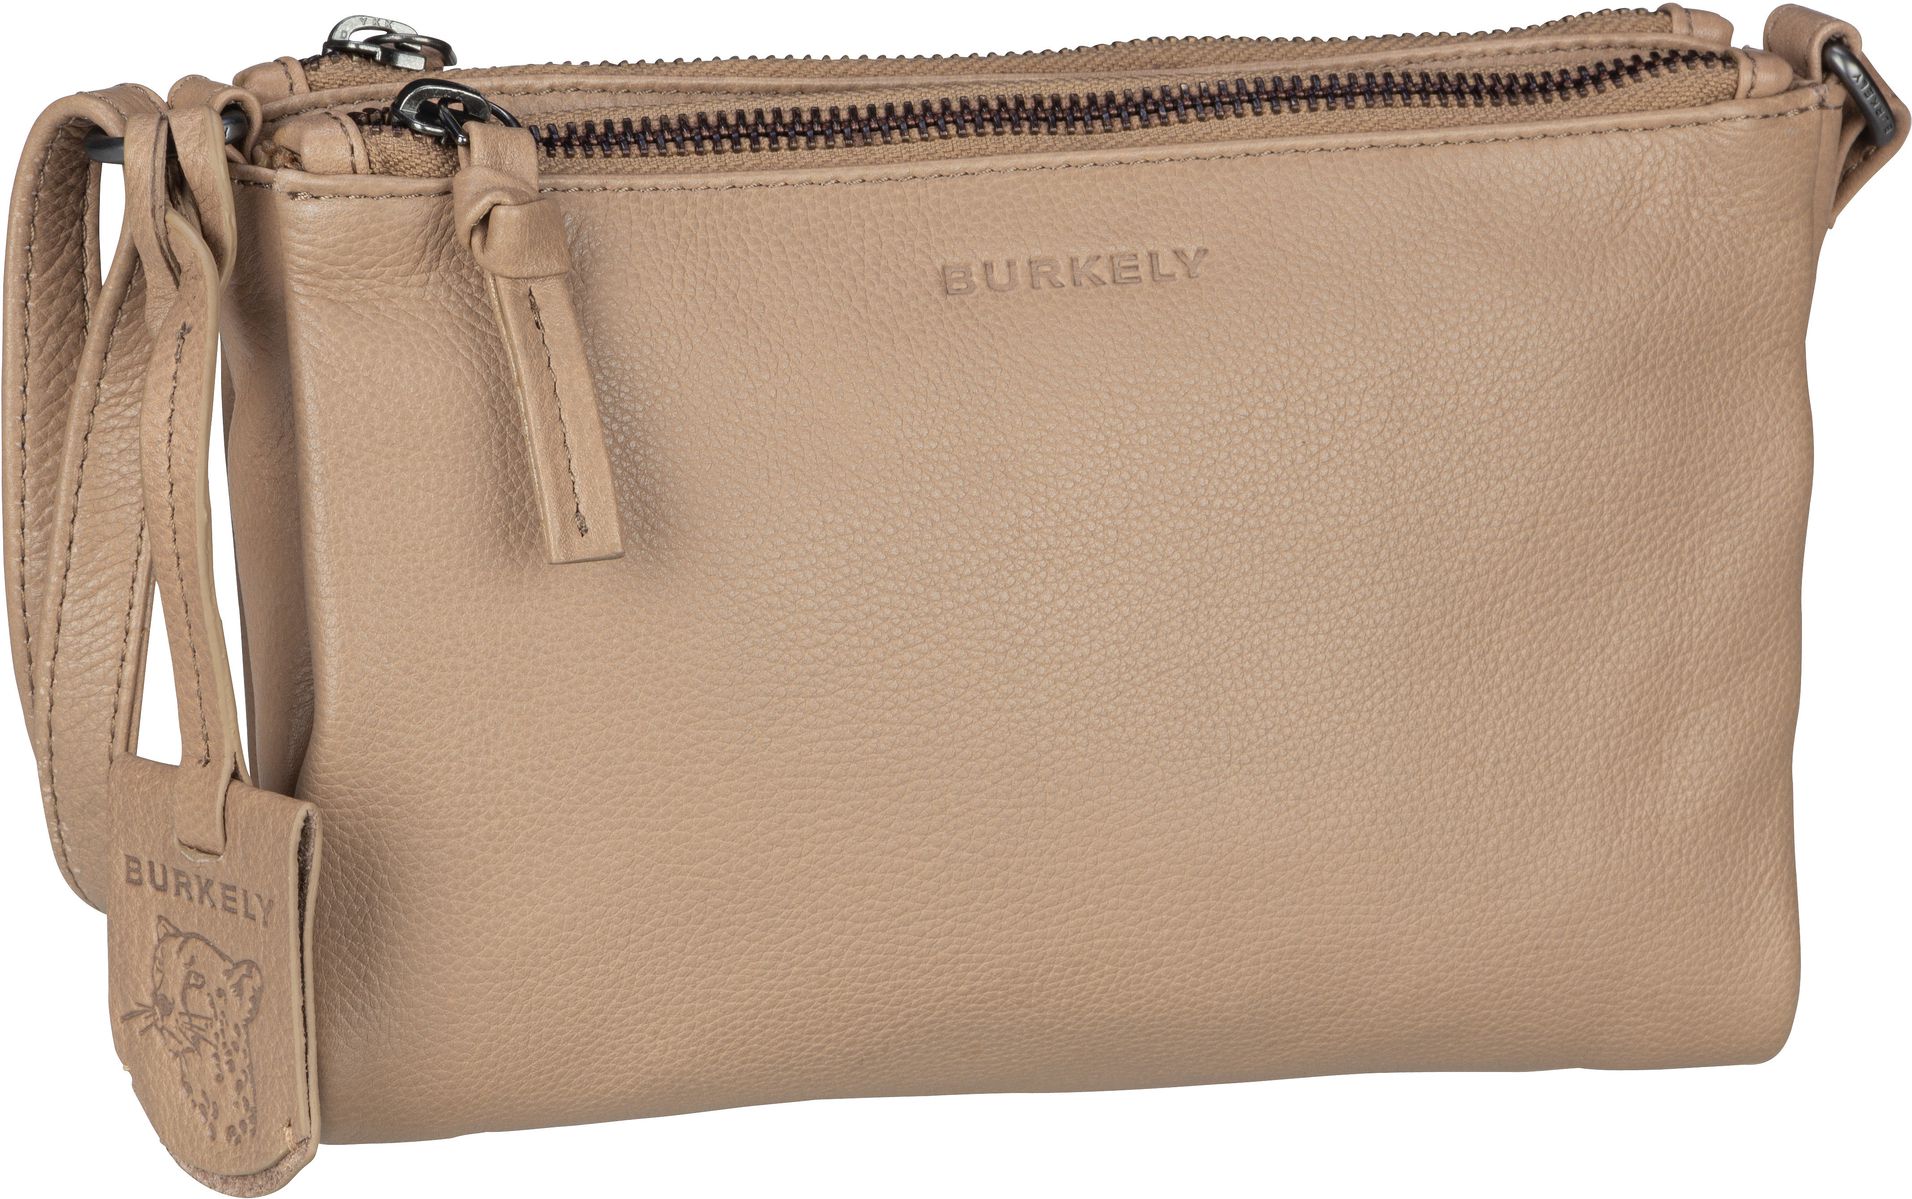 Burkely Just Jolie Double Zip Crossbody Bag - Taupe